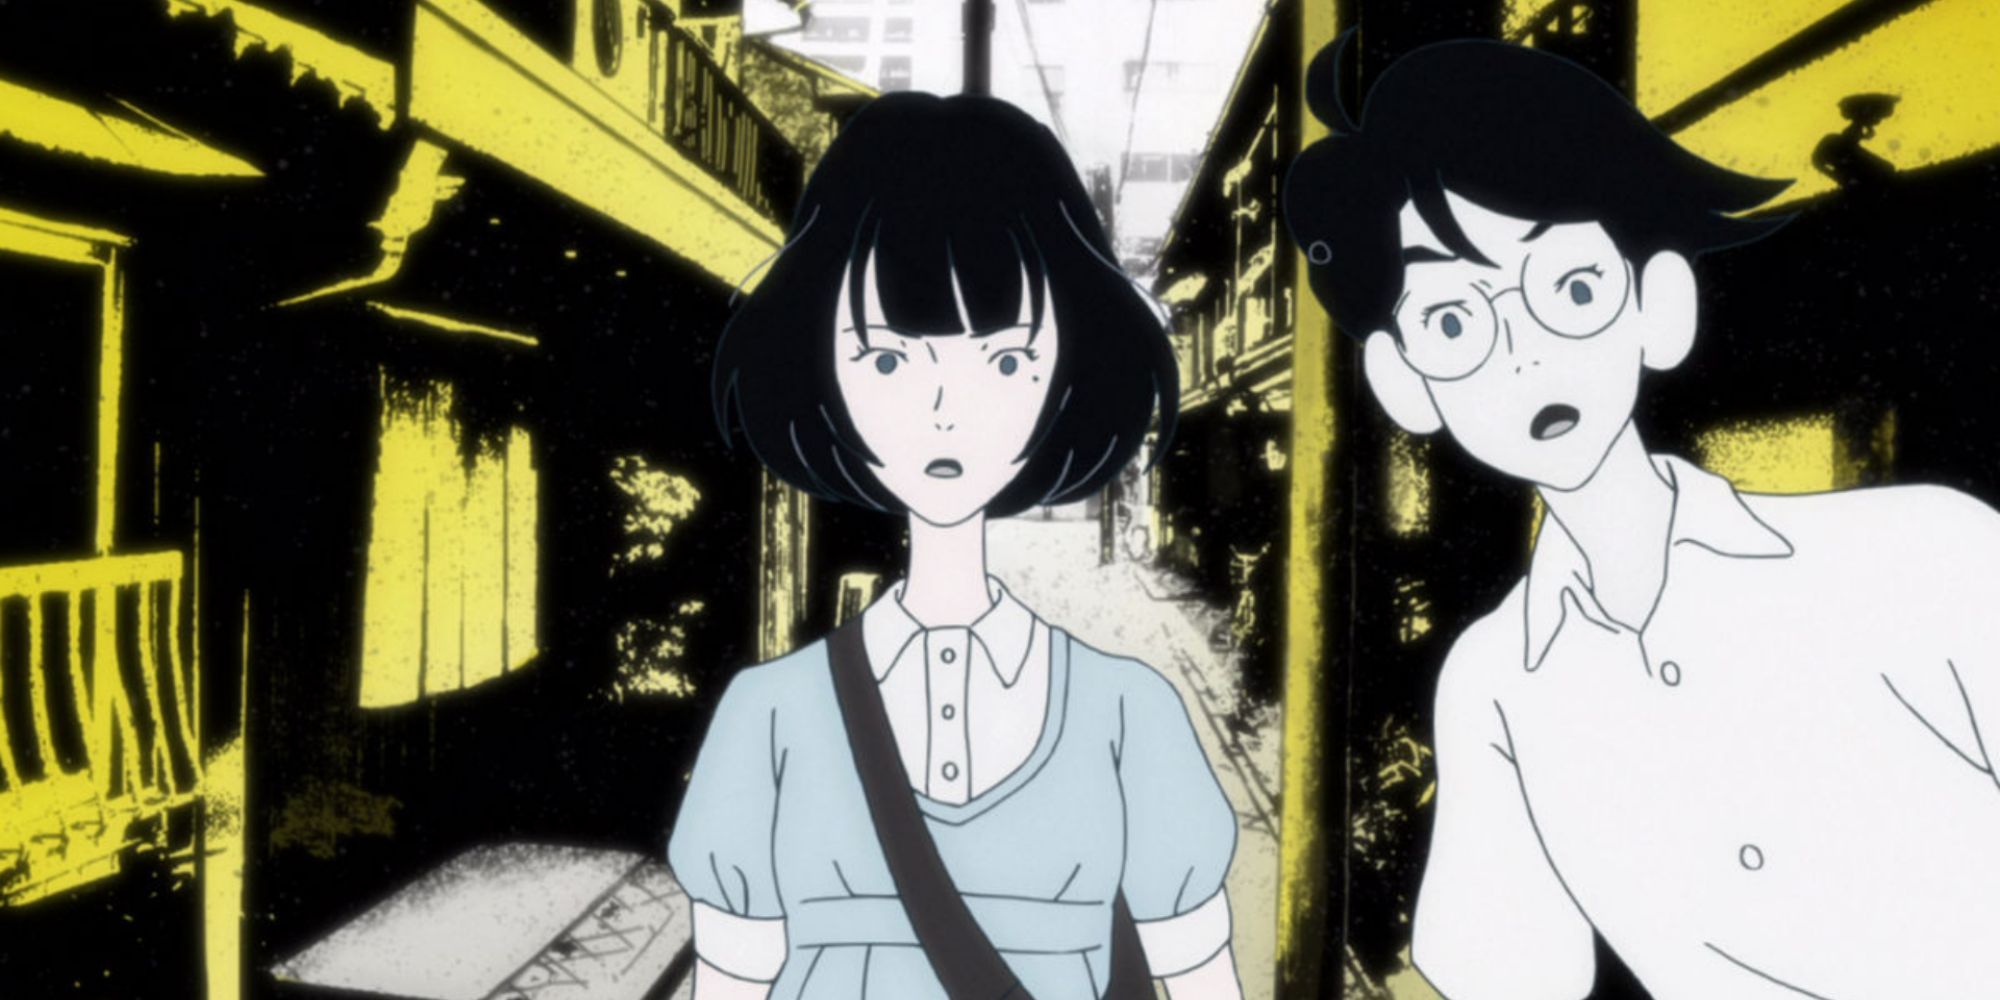 Akashi and the protagonist of The Tatami Galaxy standing beside each other